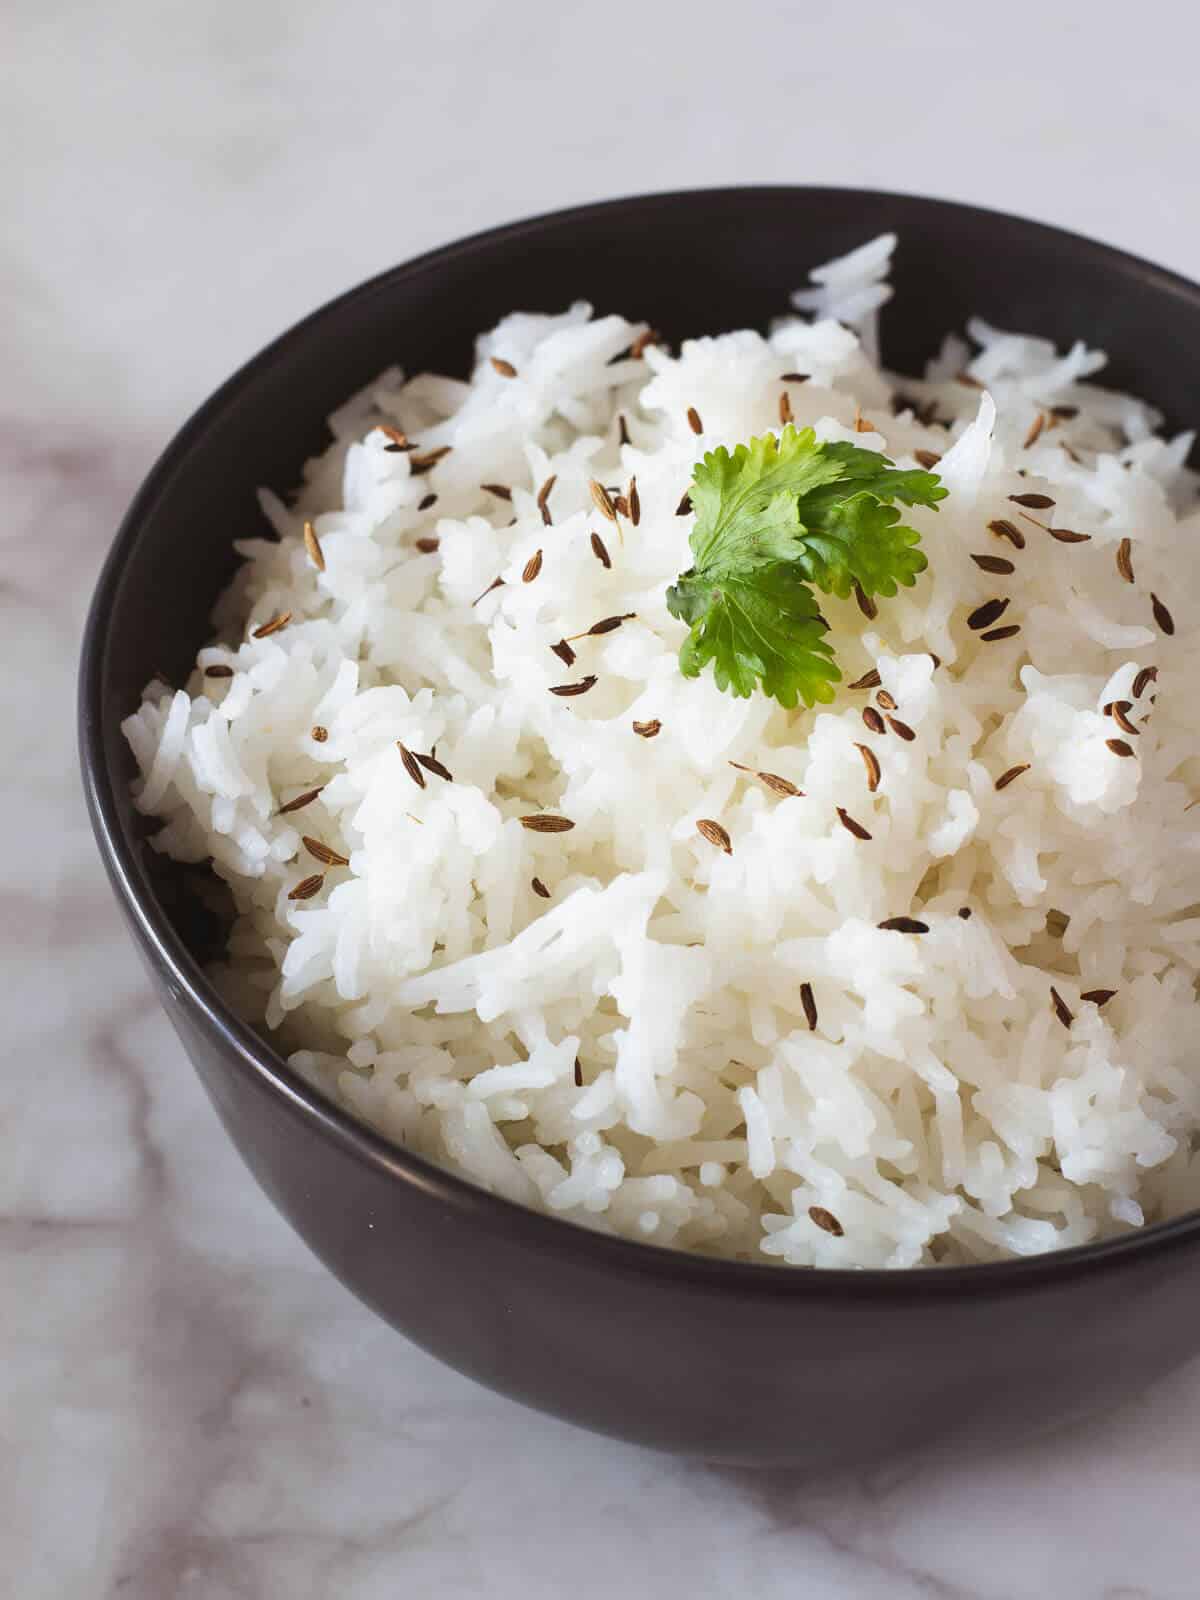 fluffy rice with toasted cumin seeds and coriander leave on top